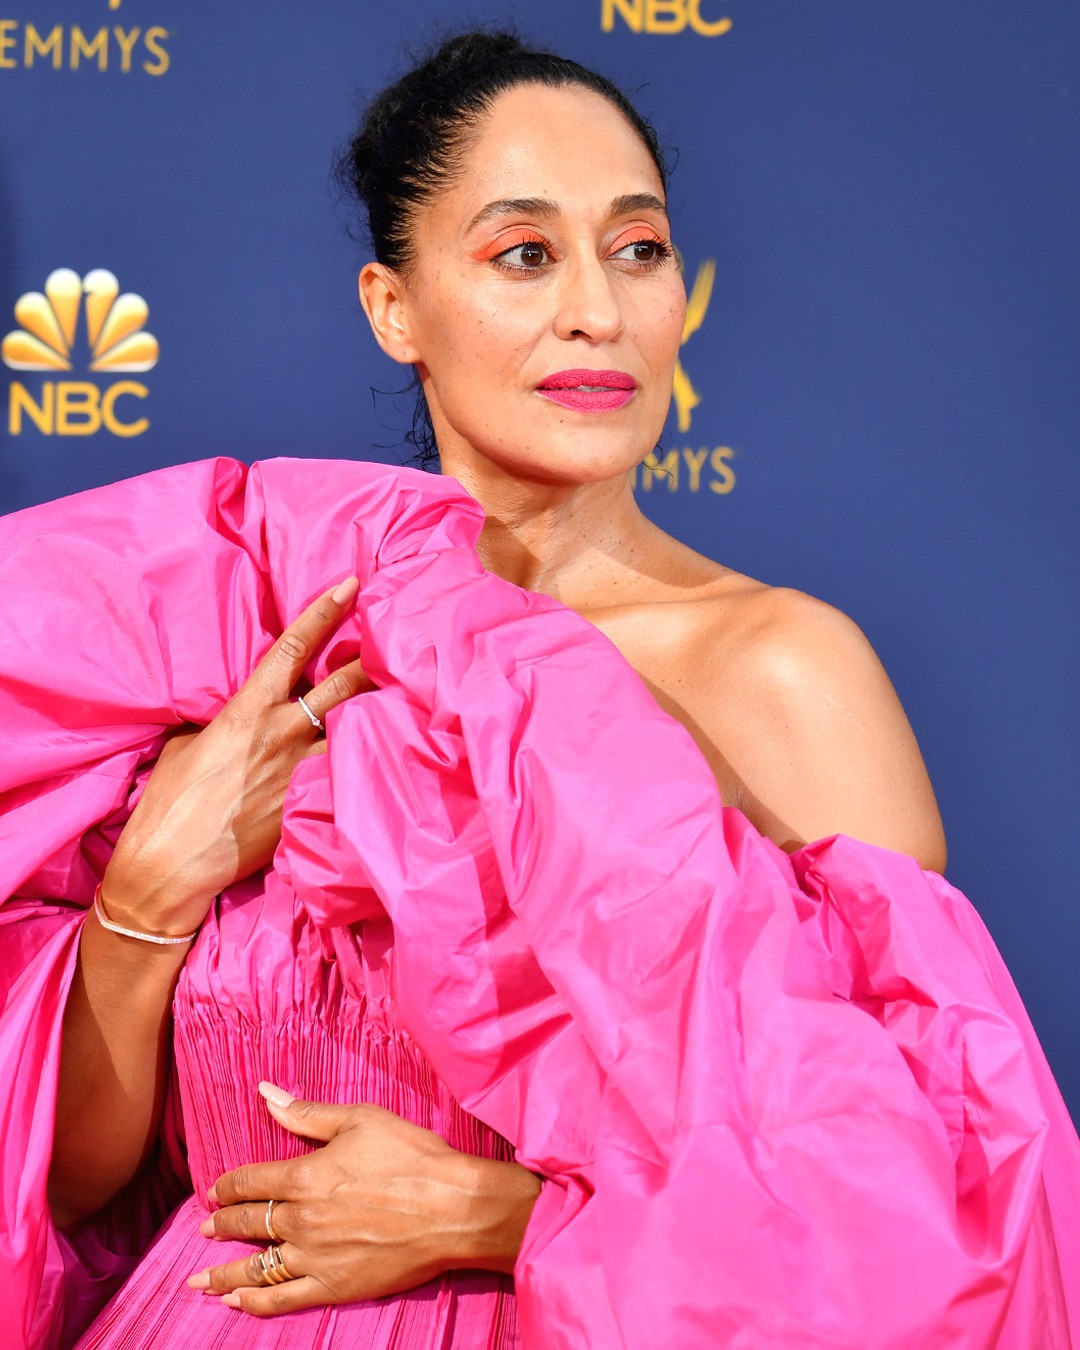 Emmys 2018 Best Beauty on the Red Carpet - Hot Lifestyle News